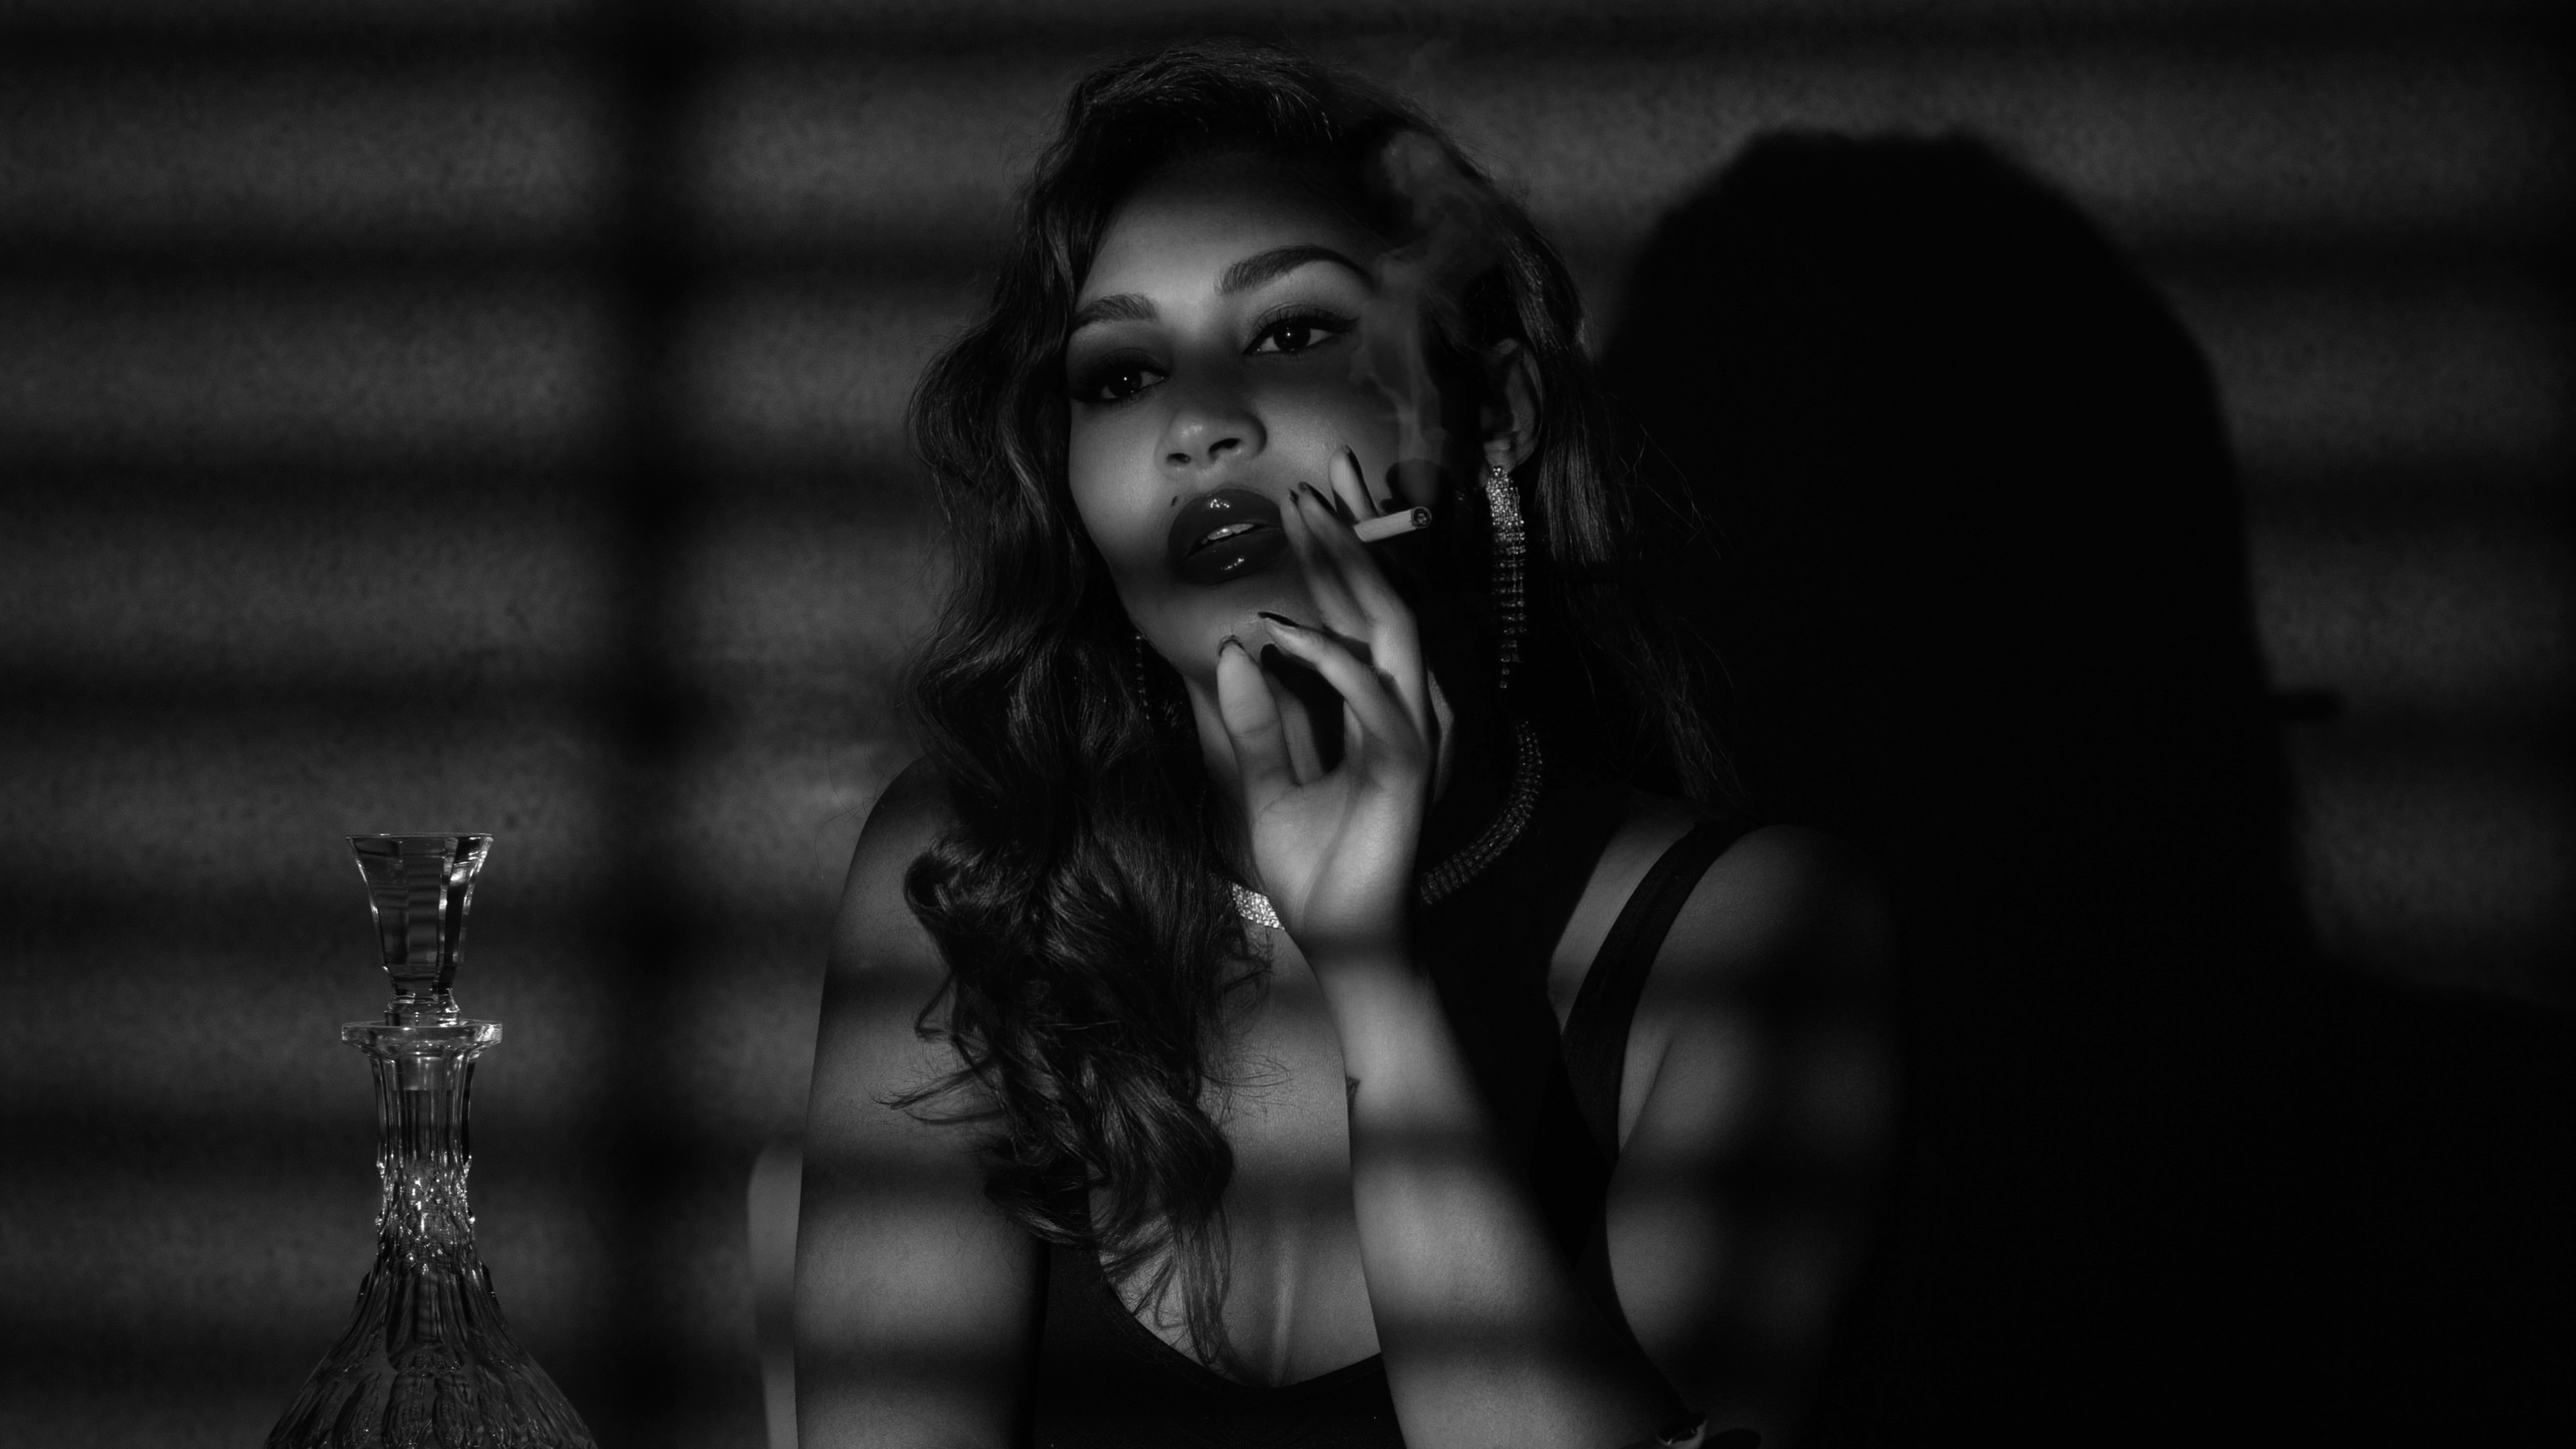 Emulate film noir lighting in a home photography using a gobo | Digital Camera World